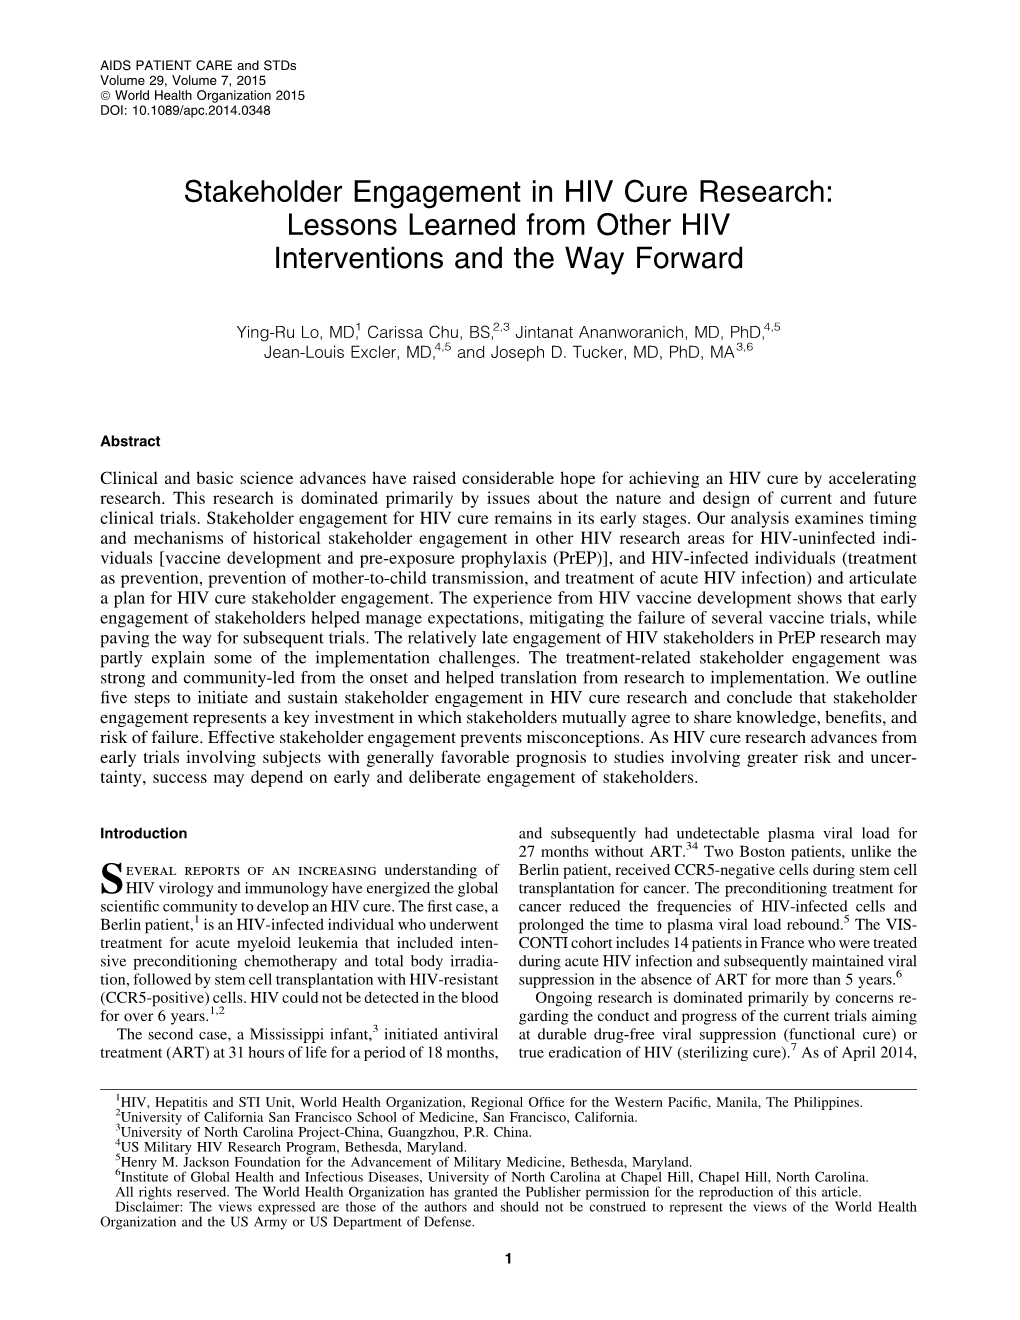 Stakeholder Engagement in HIV Cure Research: Lessons Learned from Other HIV Interventions and the Way Forward